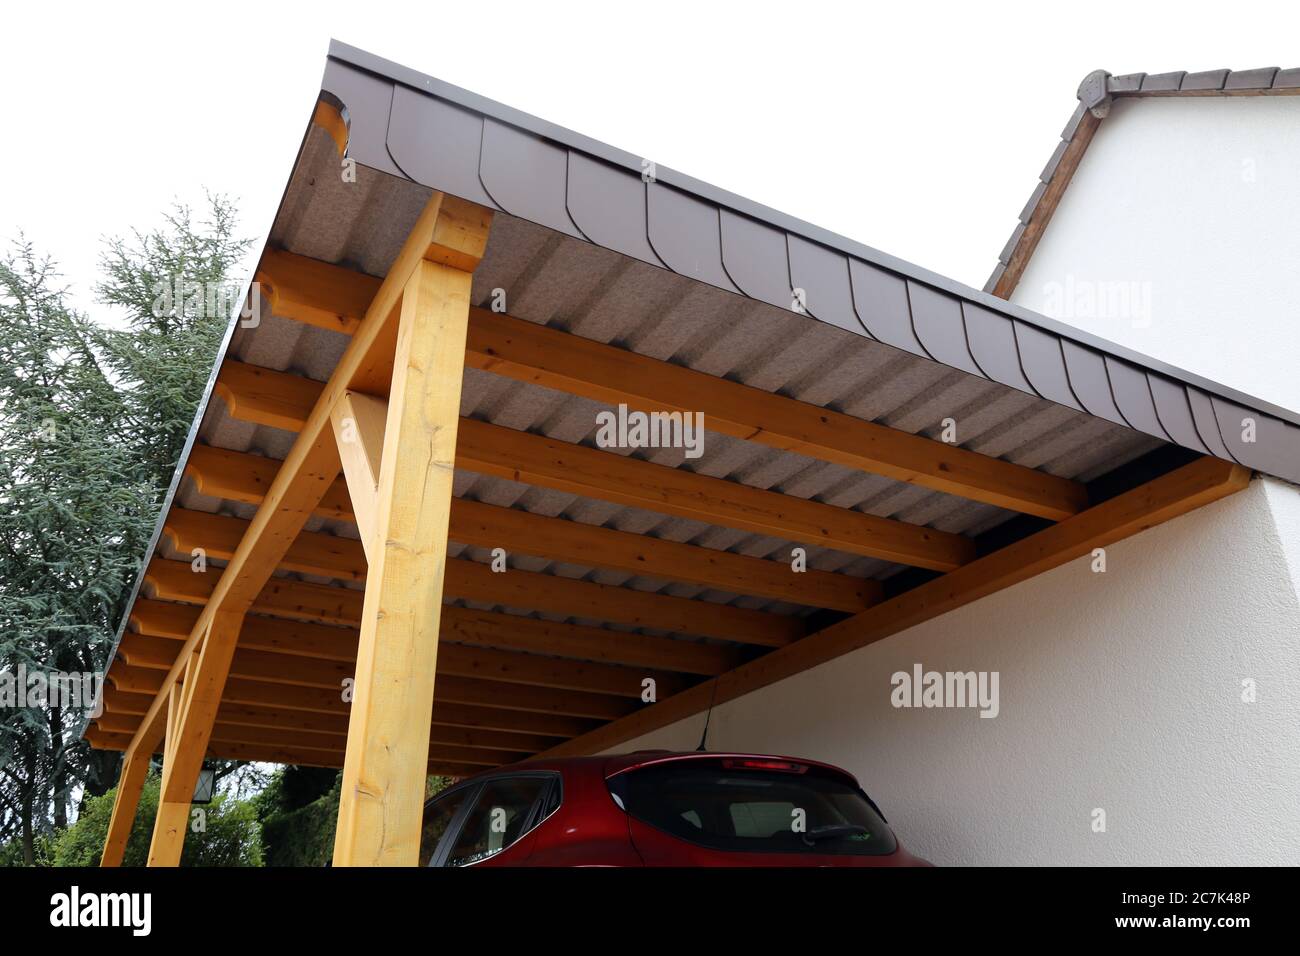 Modern and high quality carport made of wood Stock Photo